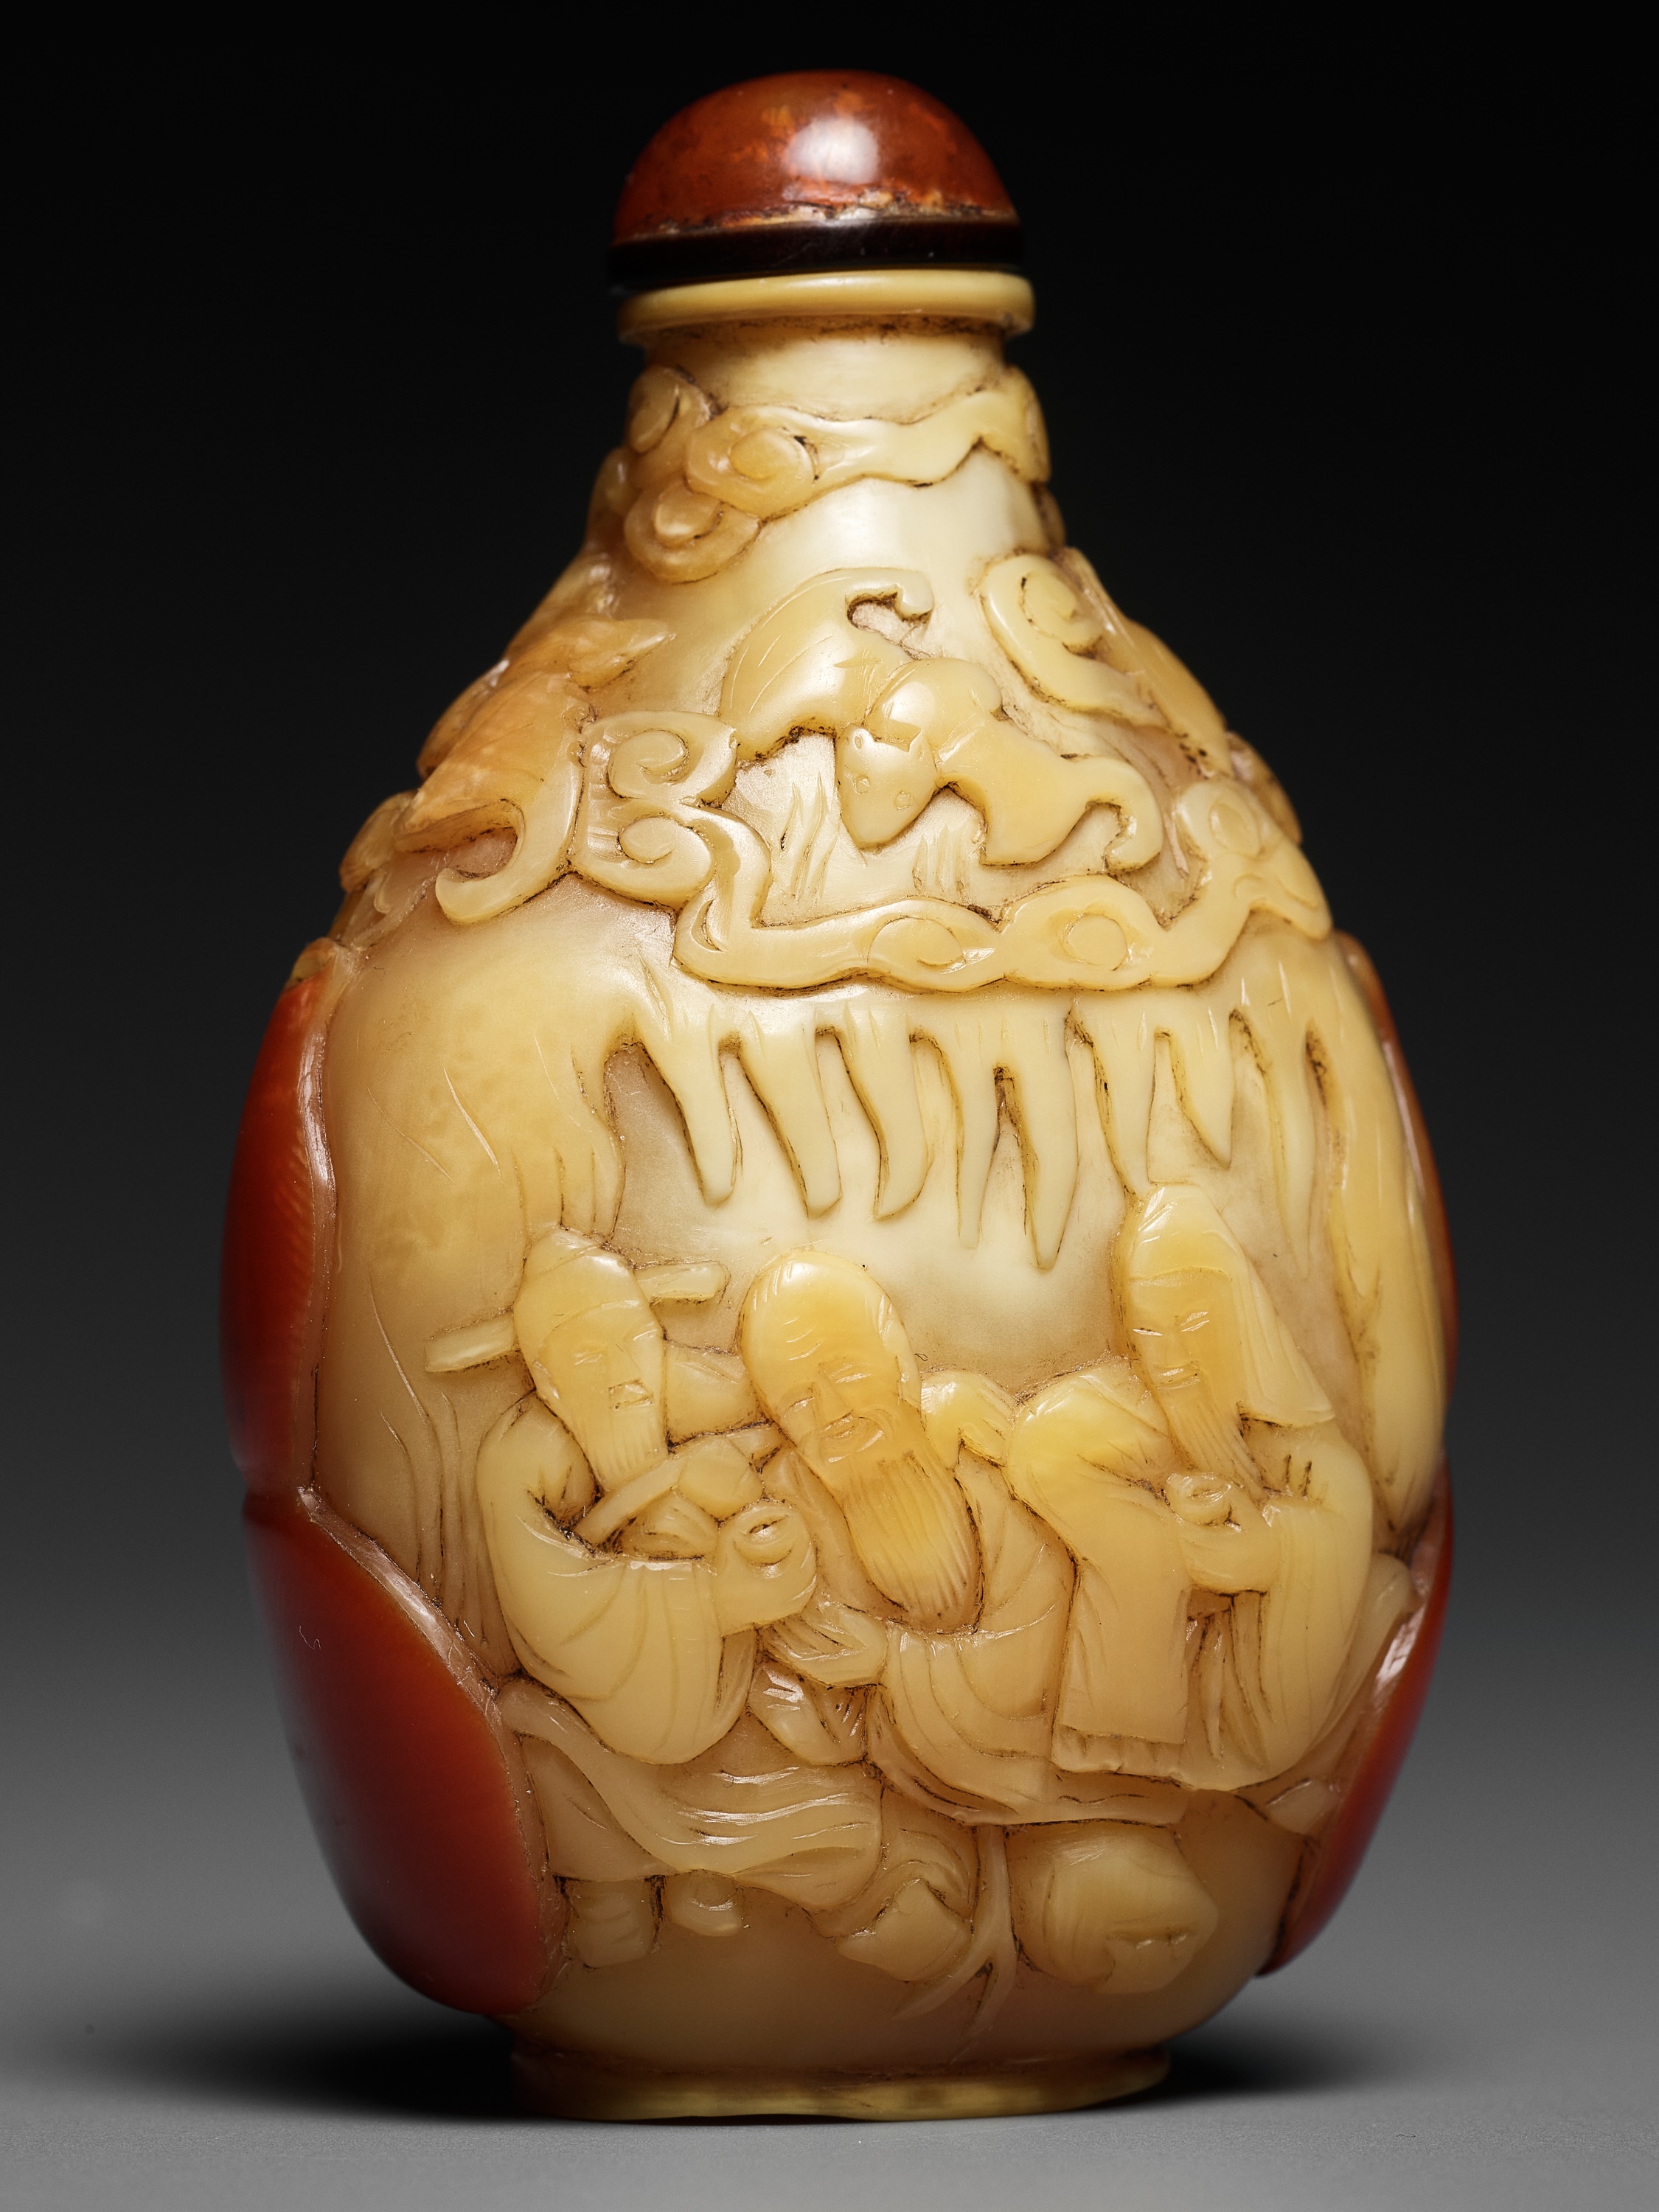 A RARE HORNBILL 'SANXING' SNUFF BOTTLE, EARLY 19TH CENTURY - Image 9 of 11